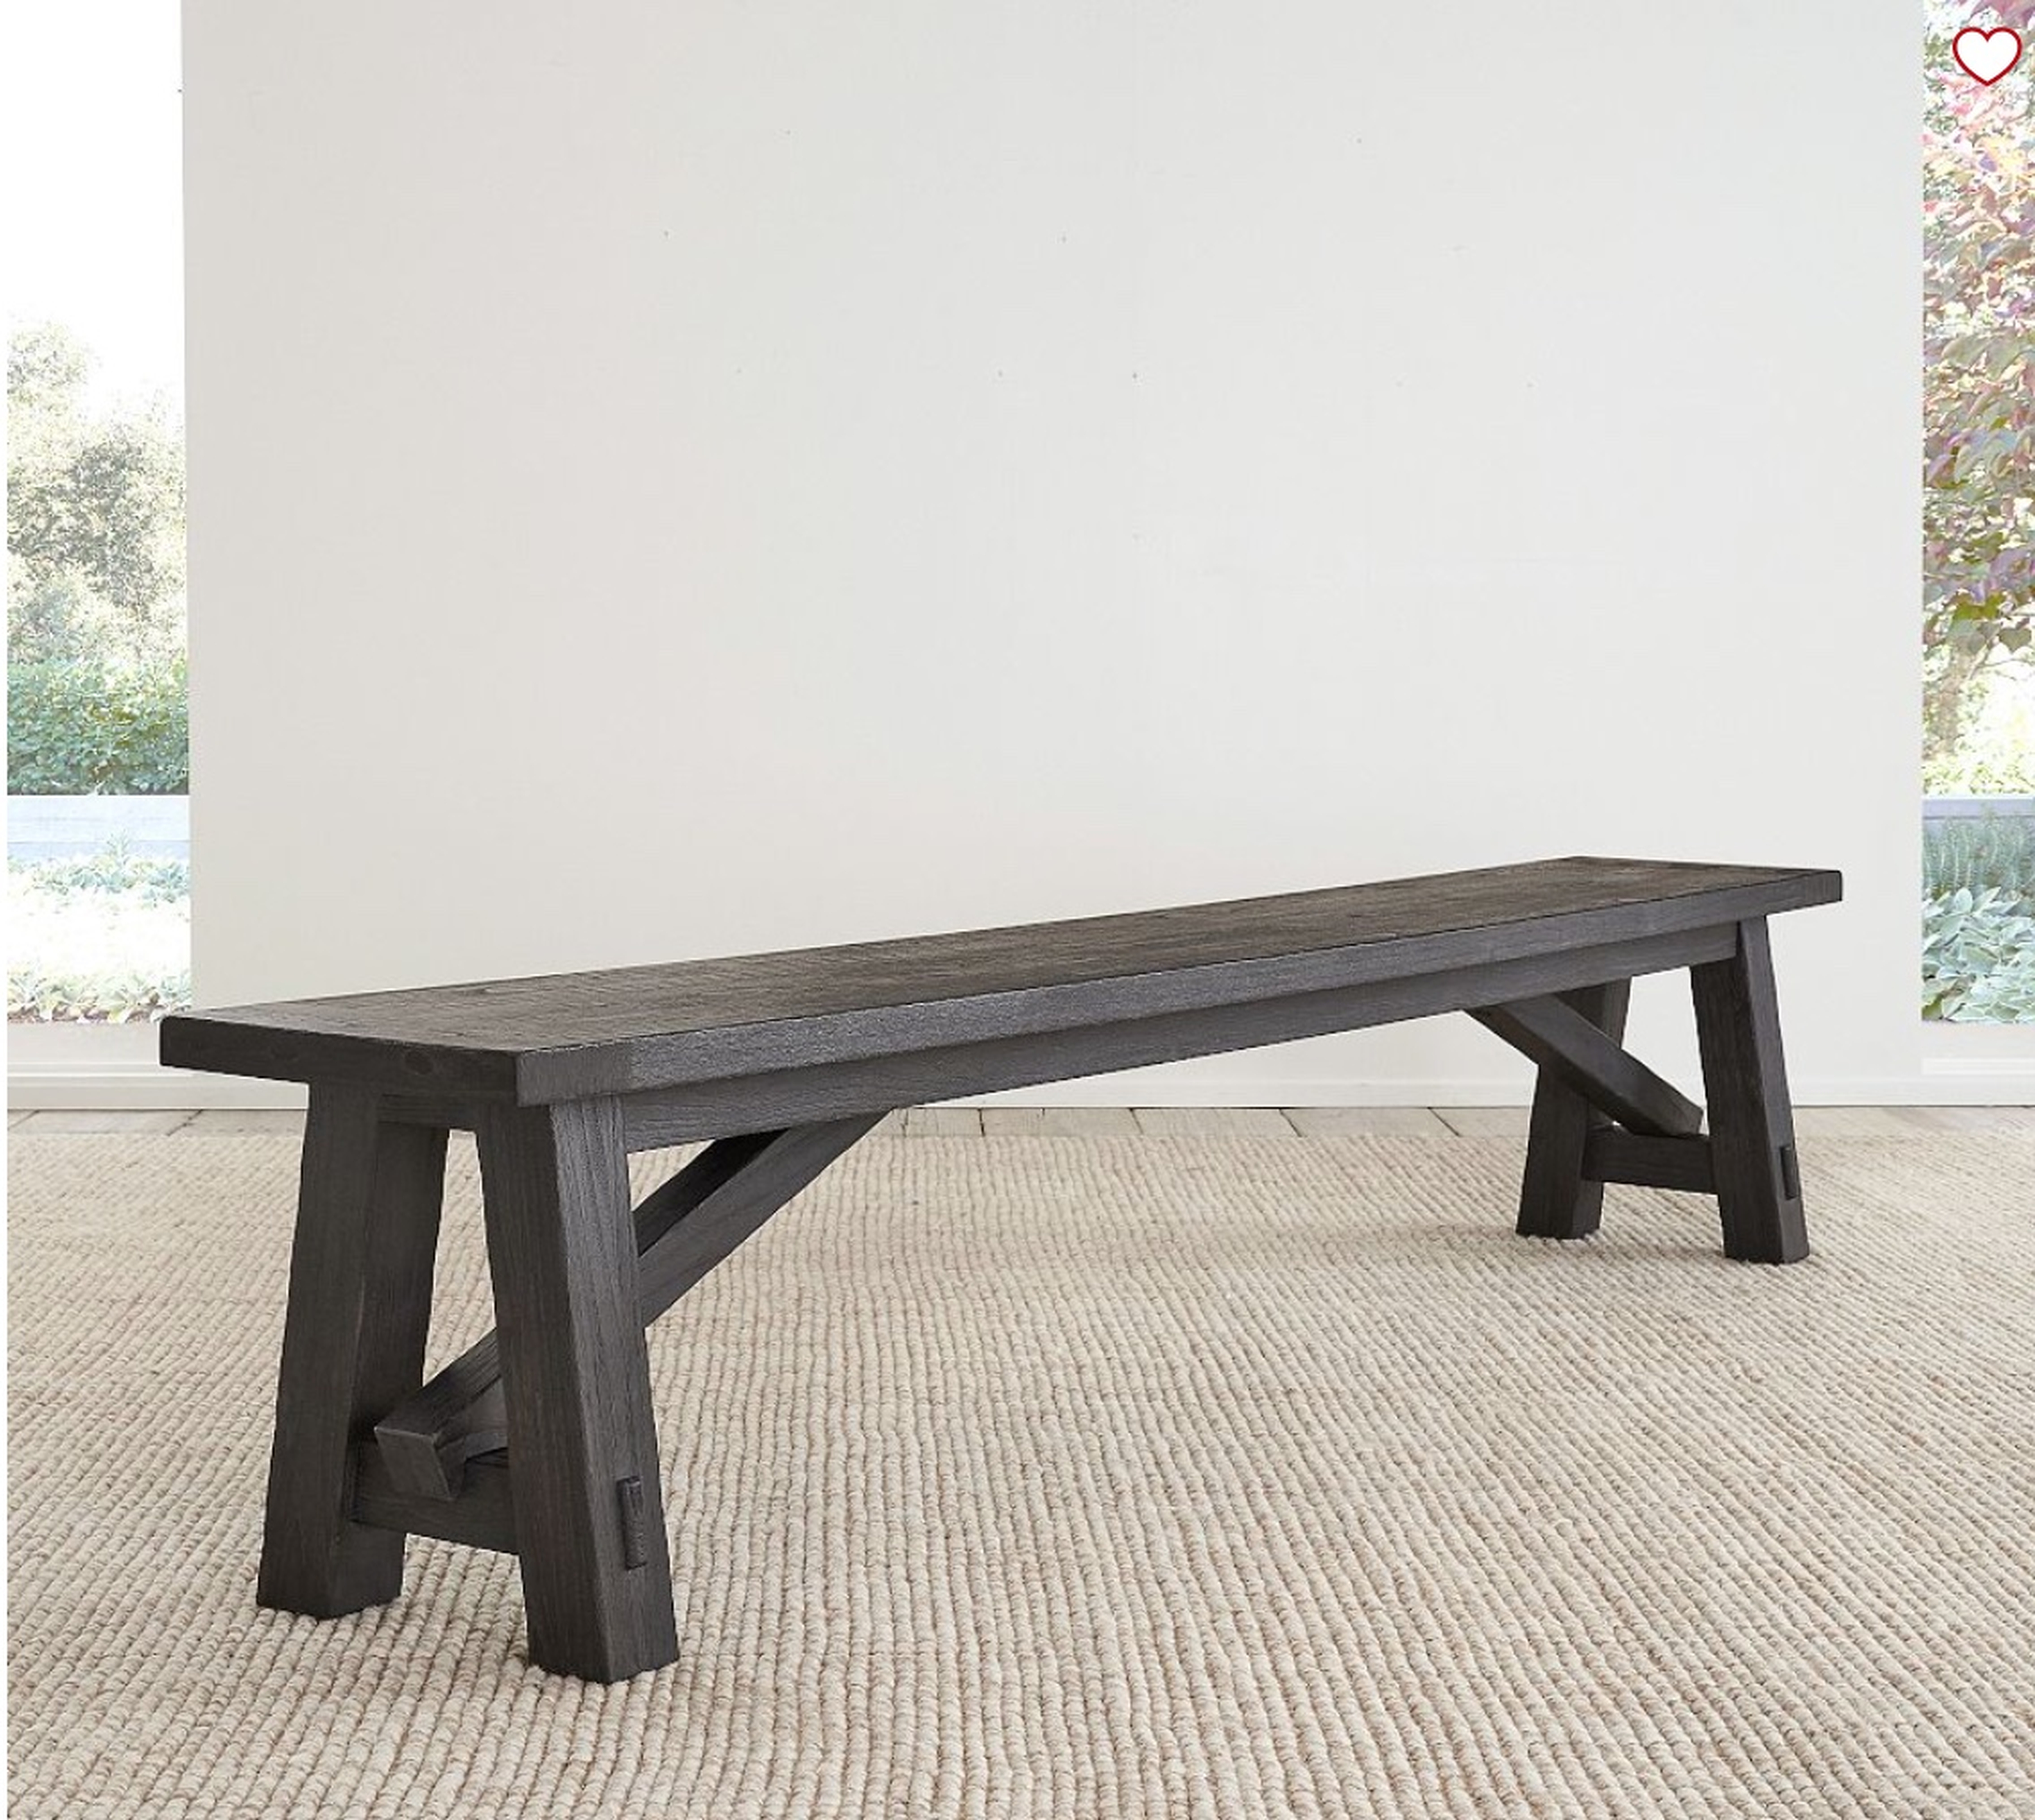 Toscana Dining Bench, 74"L x 14"W, Dusty Charcoal - Pottery Barn